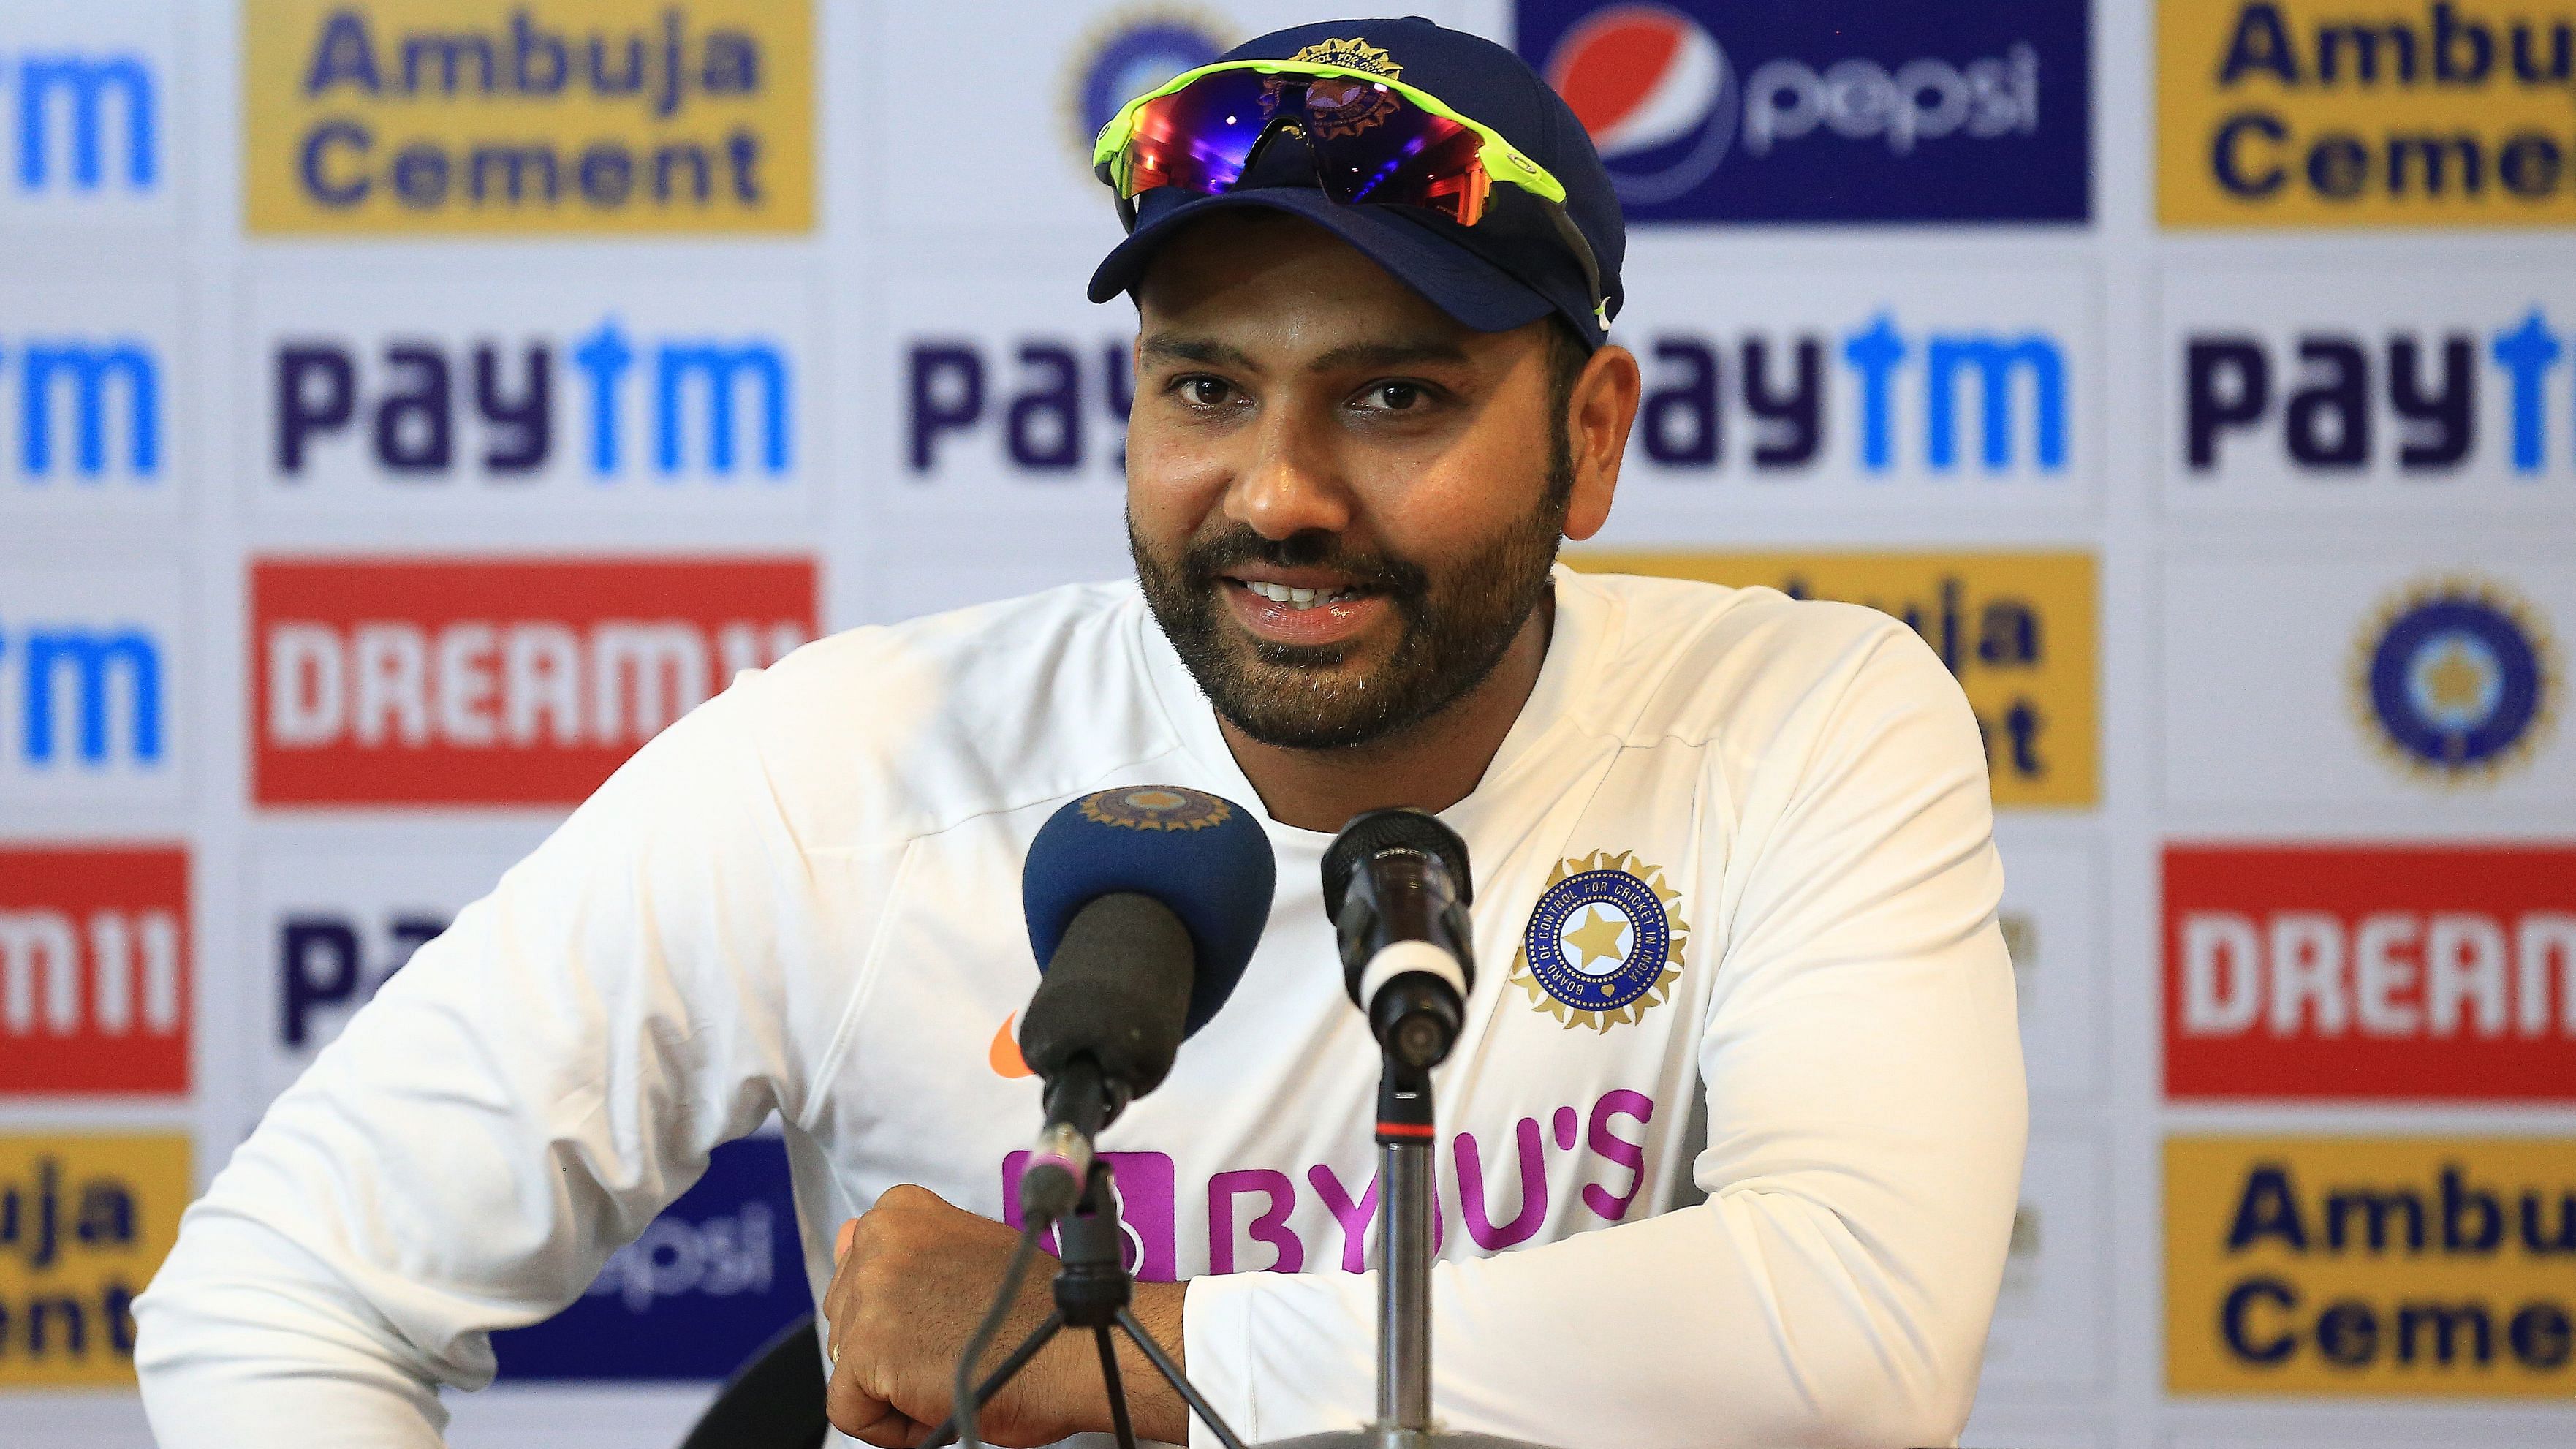 Skipper Rohit Sharma faces selection headaches before start of first Test against Australia